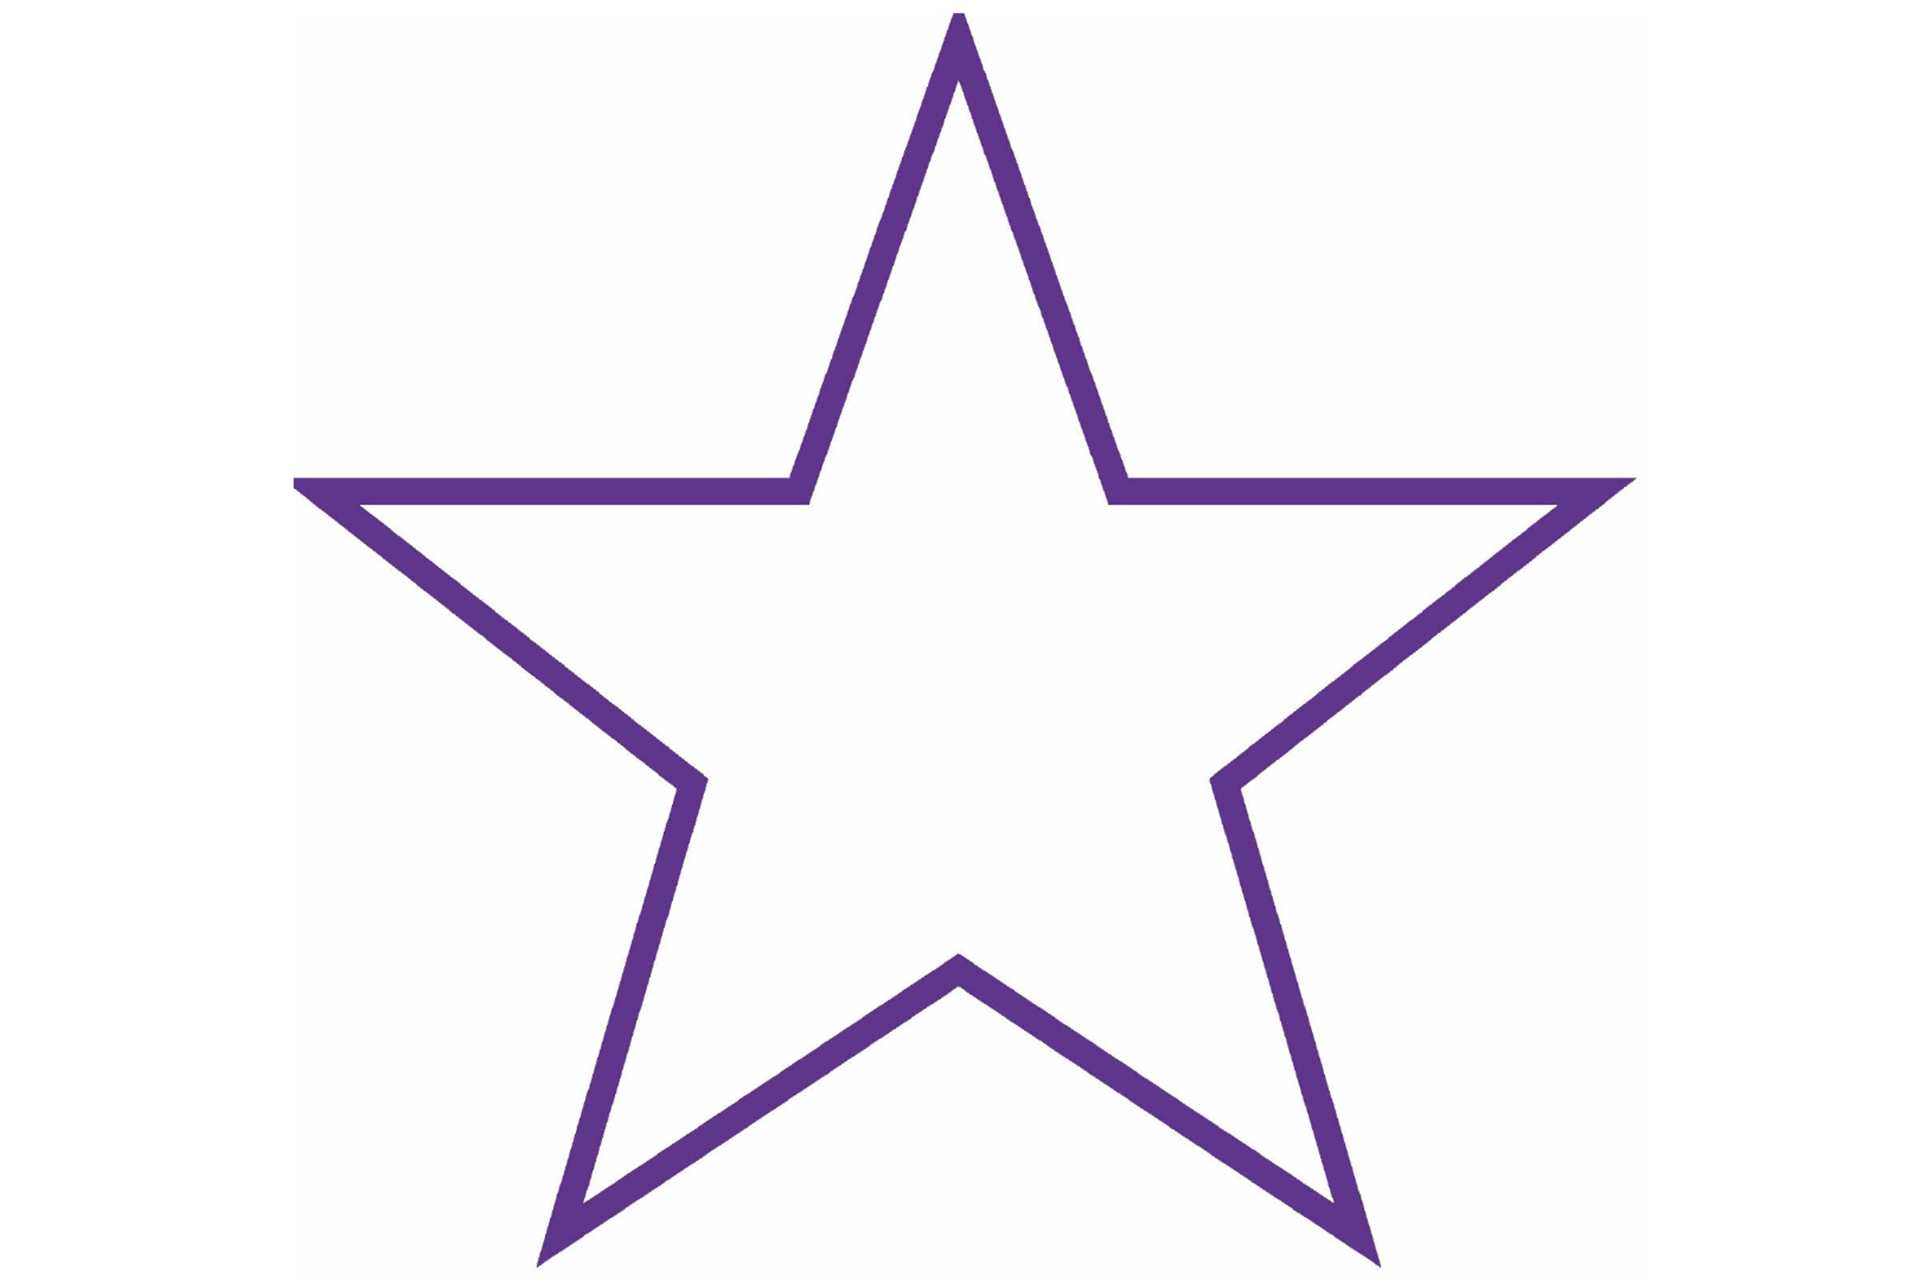 Image of a purple edged star on white background.